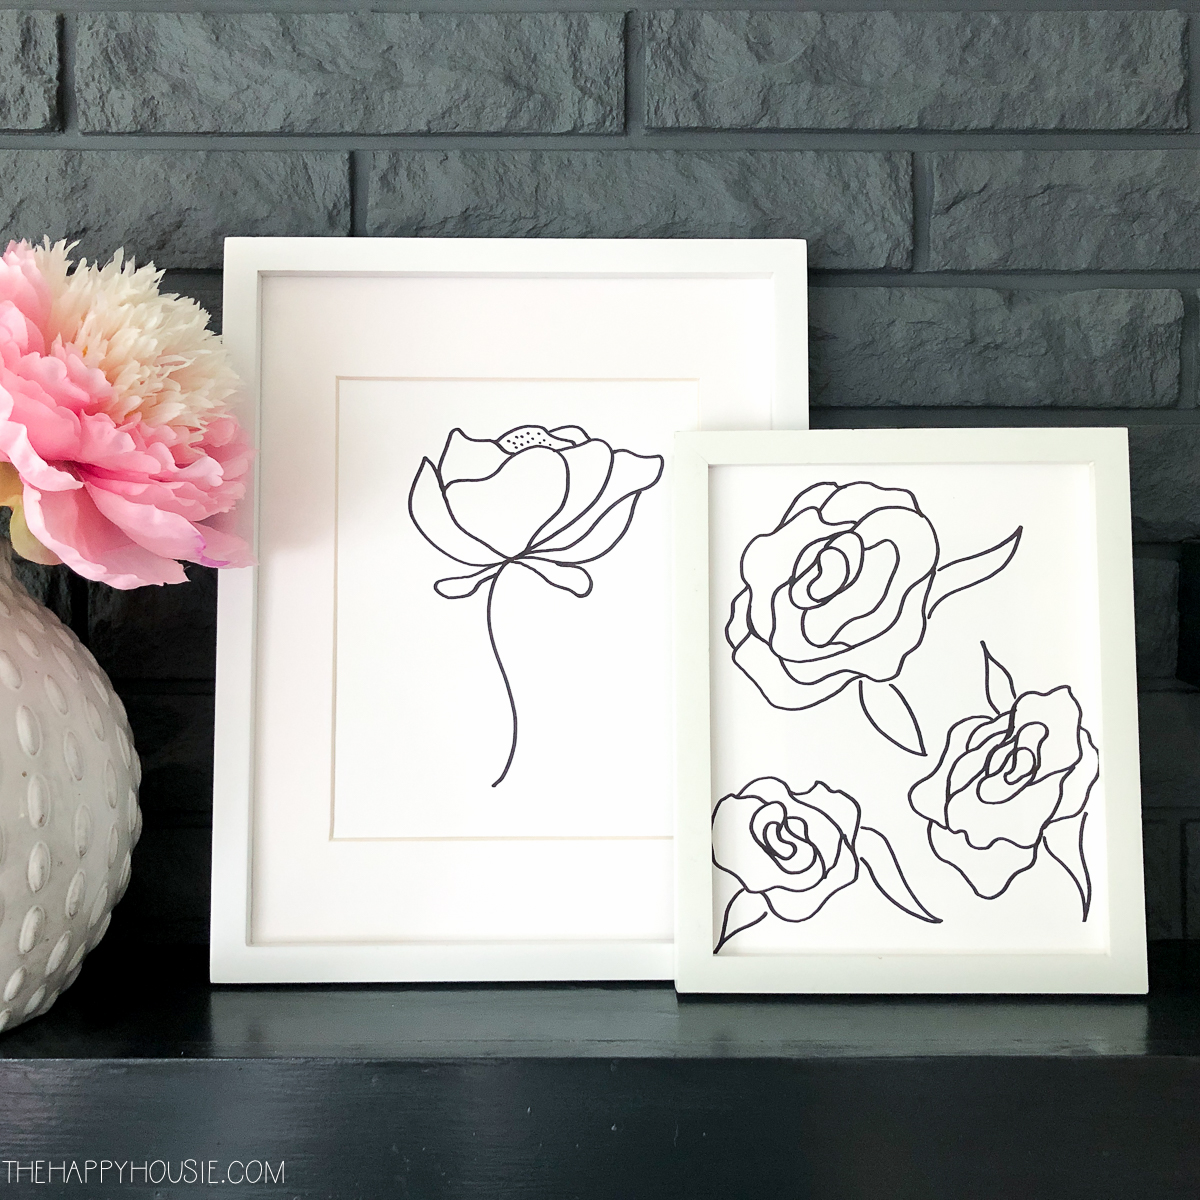 The peony line drawings framed.